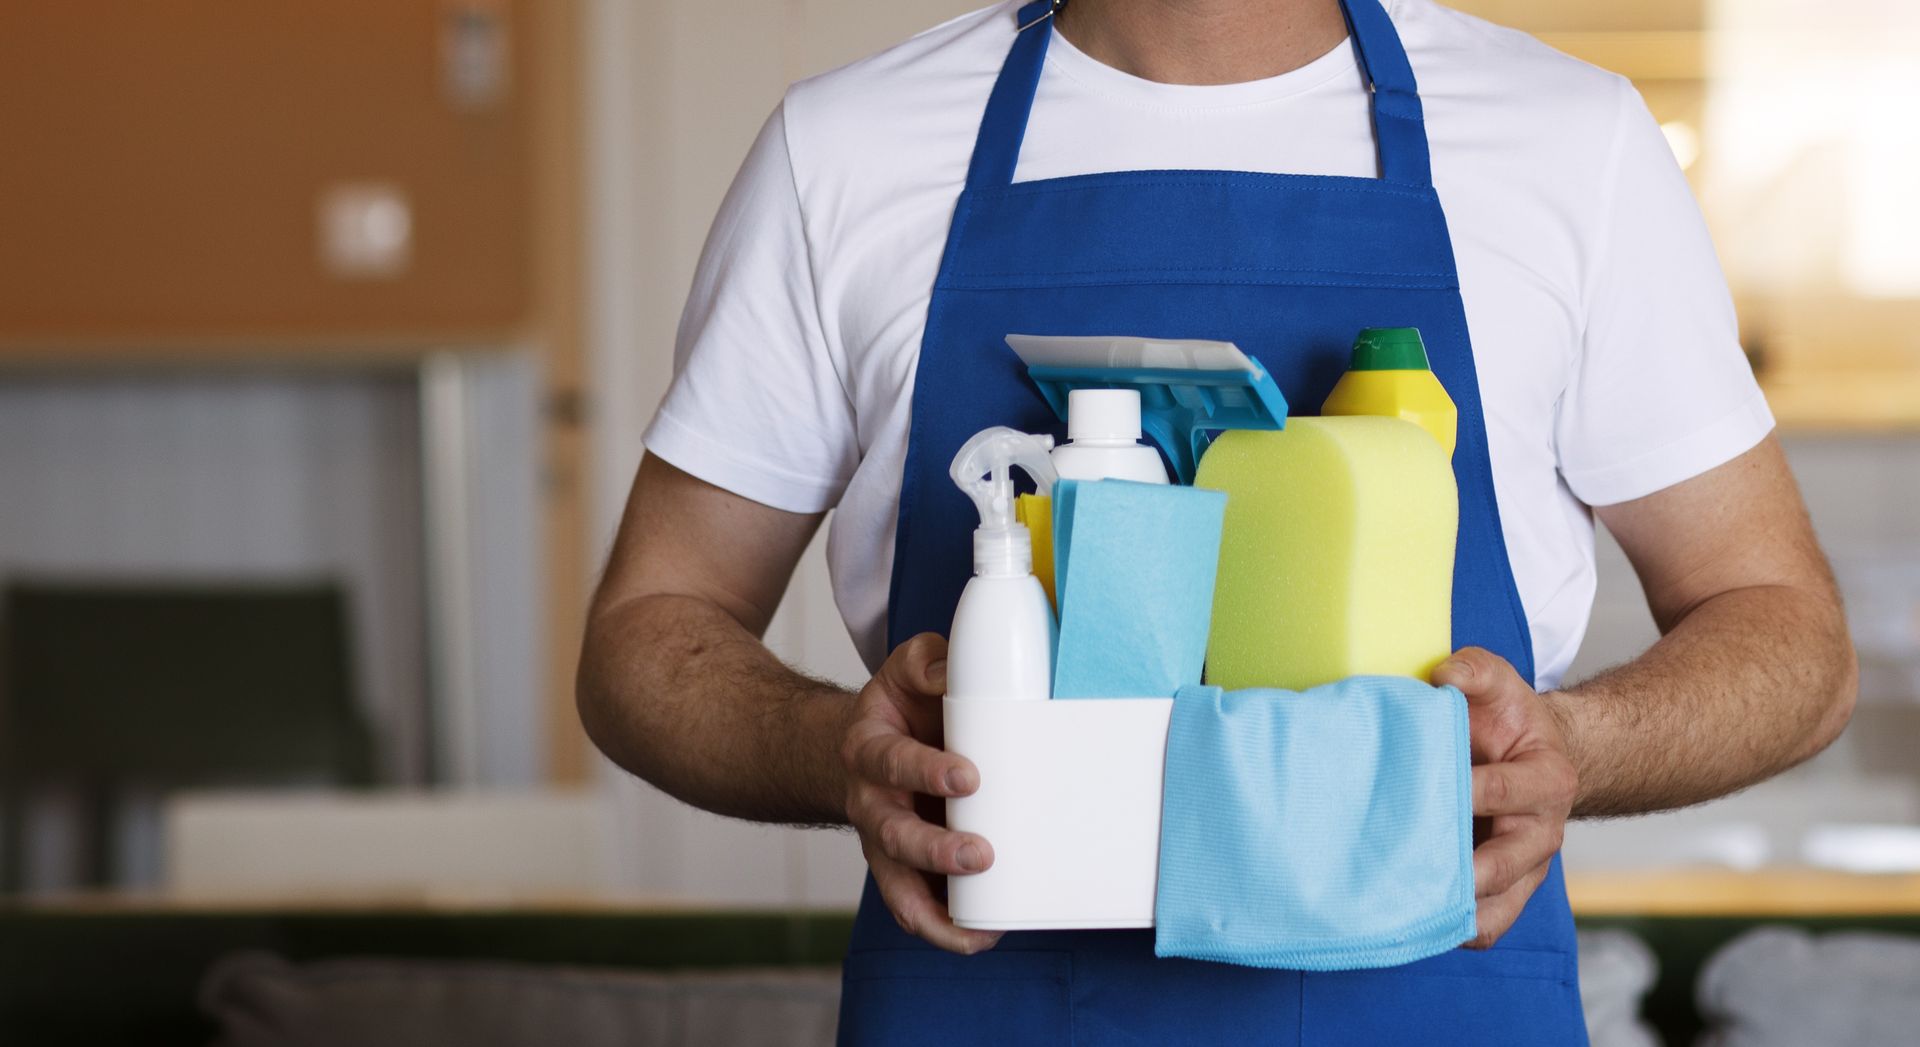 A man in an apron is holding cleaning supplies in his hands.